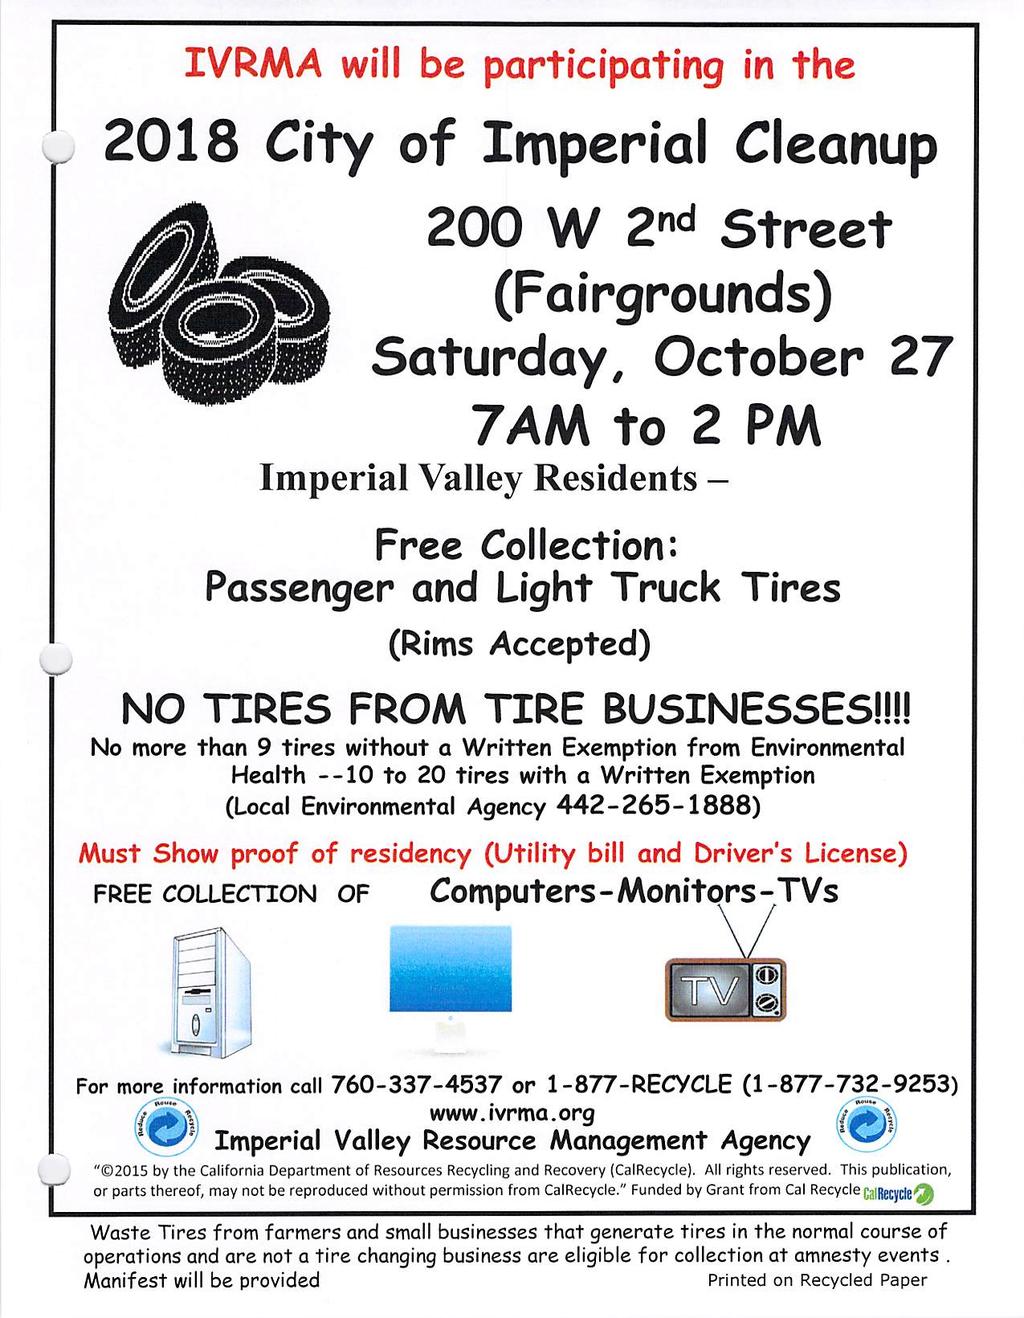 IVRMA will be participating in the 2018 City of Imperial Cleanup 1 i 200 W 2"^ Street (Fairgrounds) Saturday, October 27 7AM to 2 PM Imperial Valley Residents - Free Collection: Passenger and Light